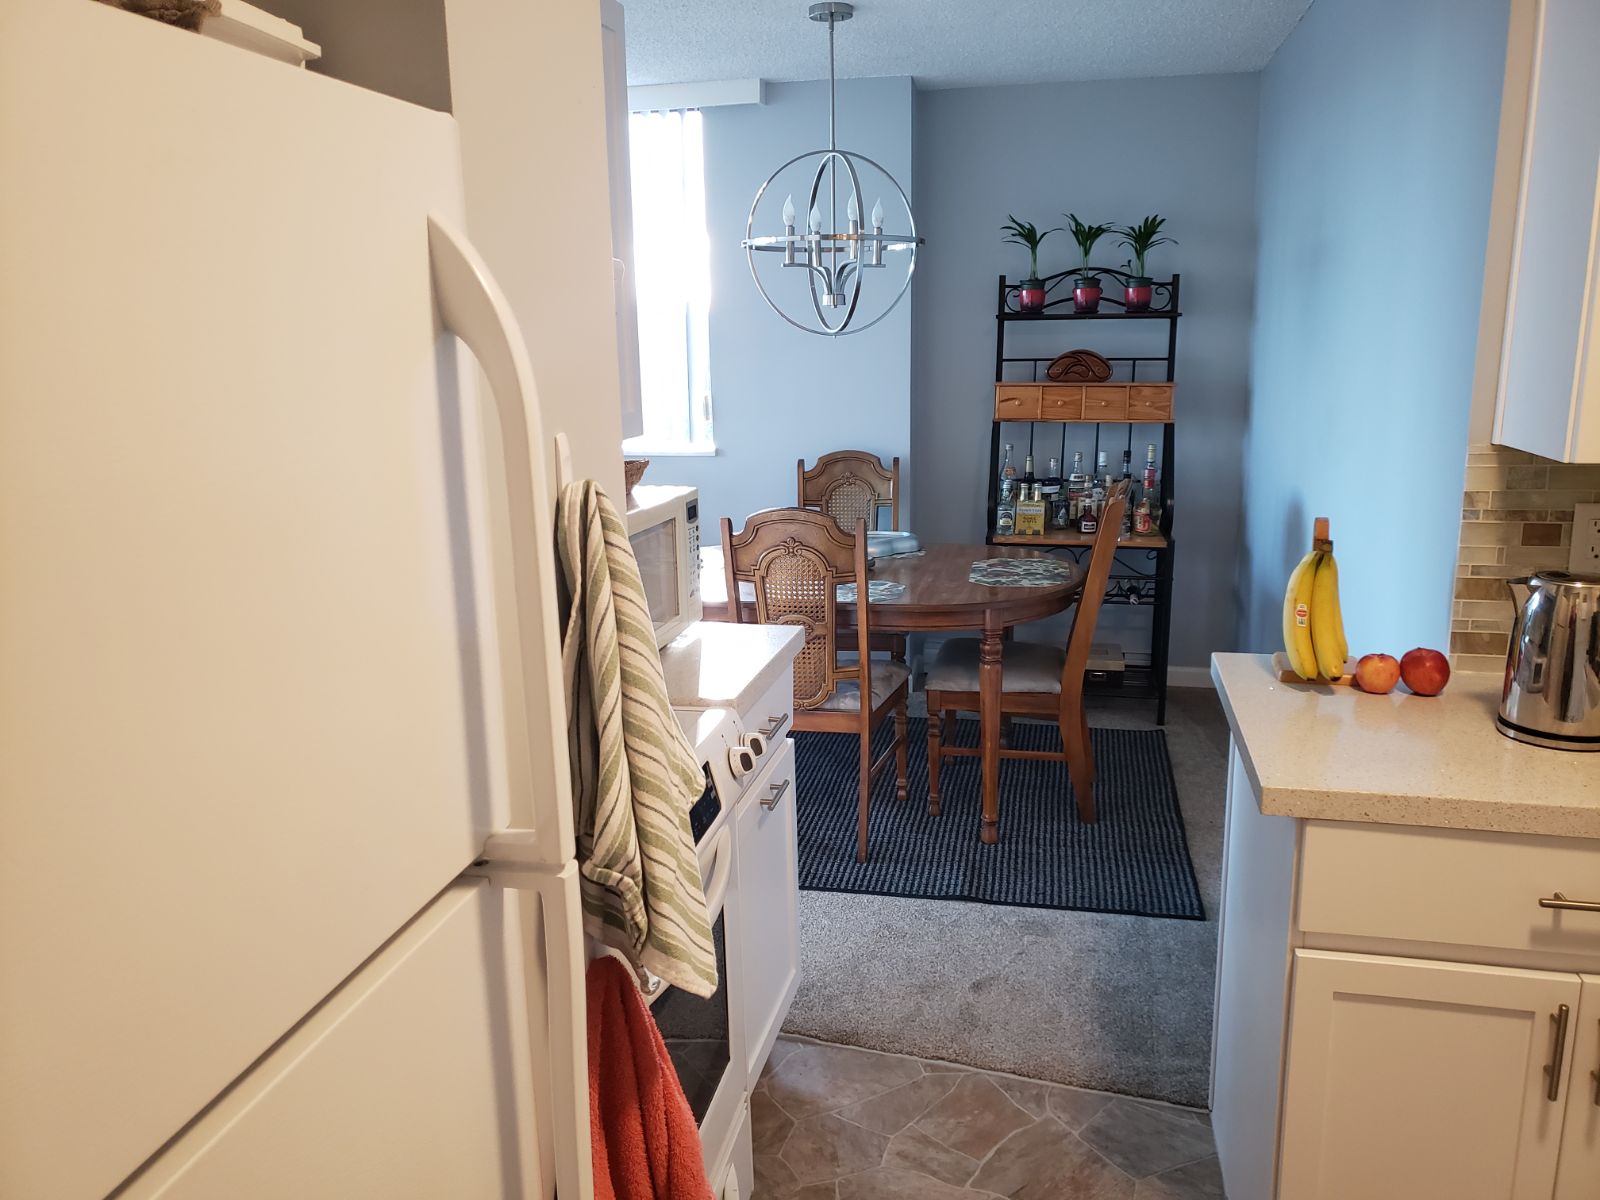 Immaculately organized kitchen with a neat fridge and clear countertops after decluttering.